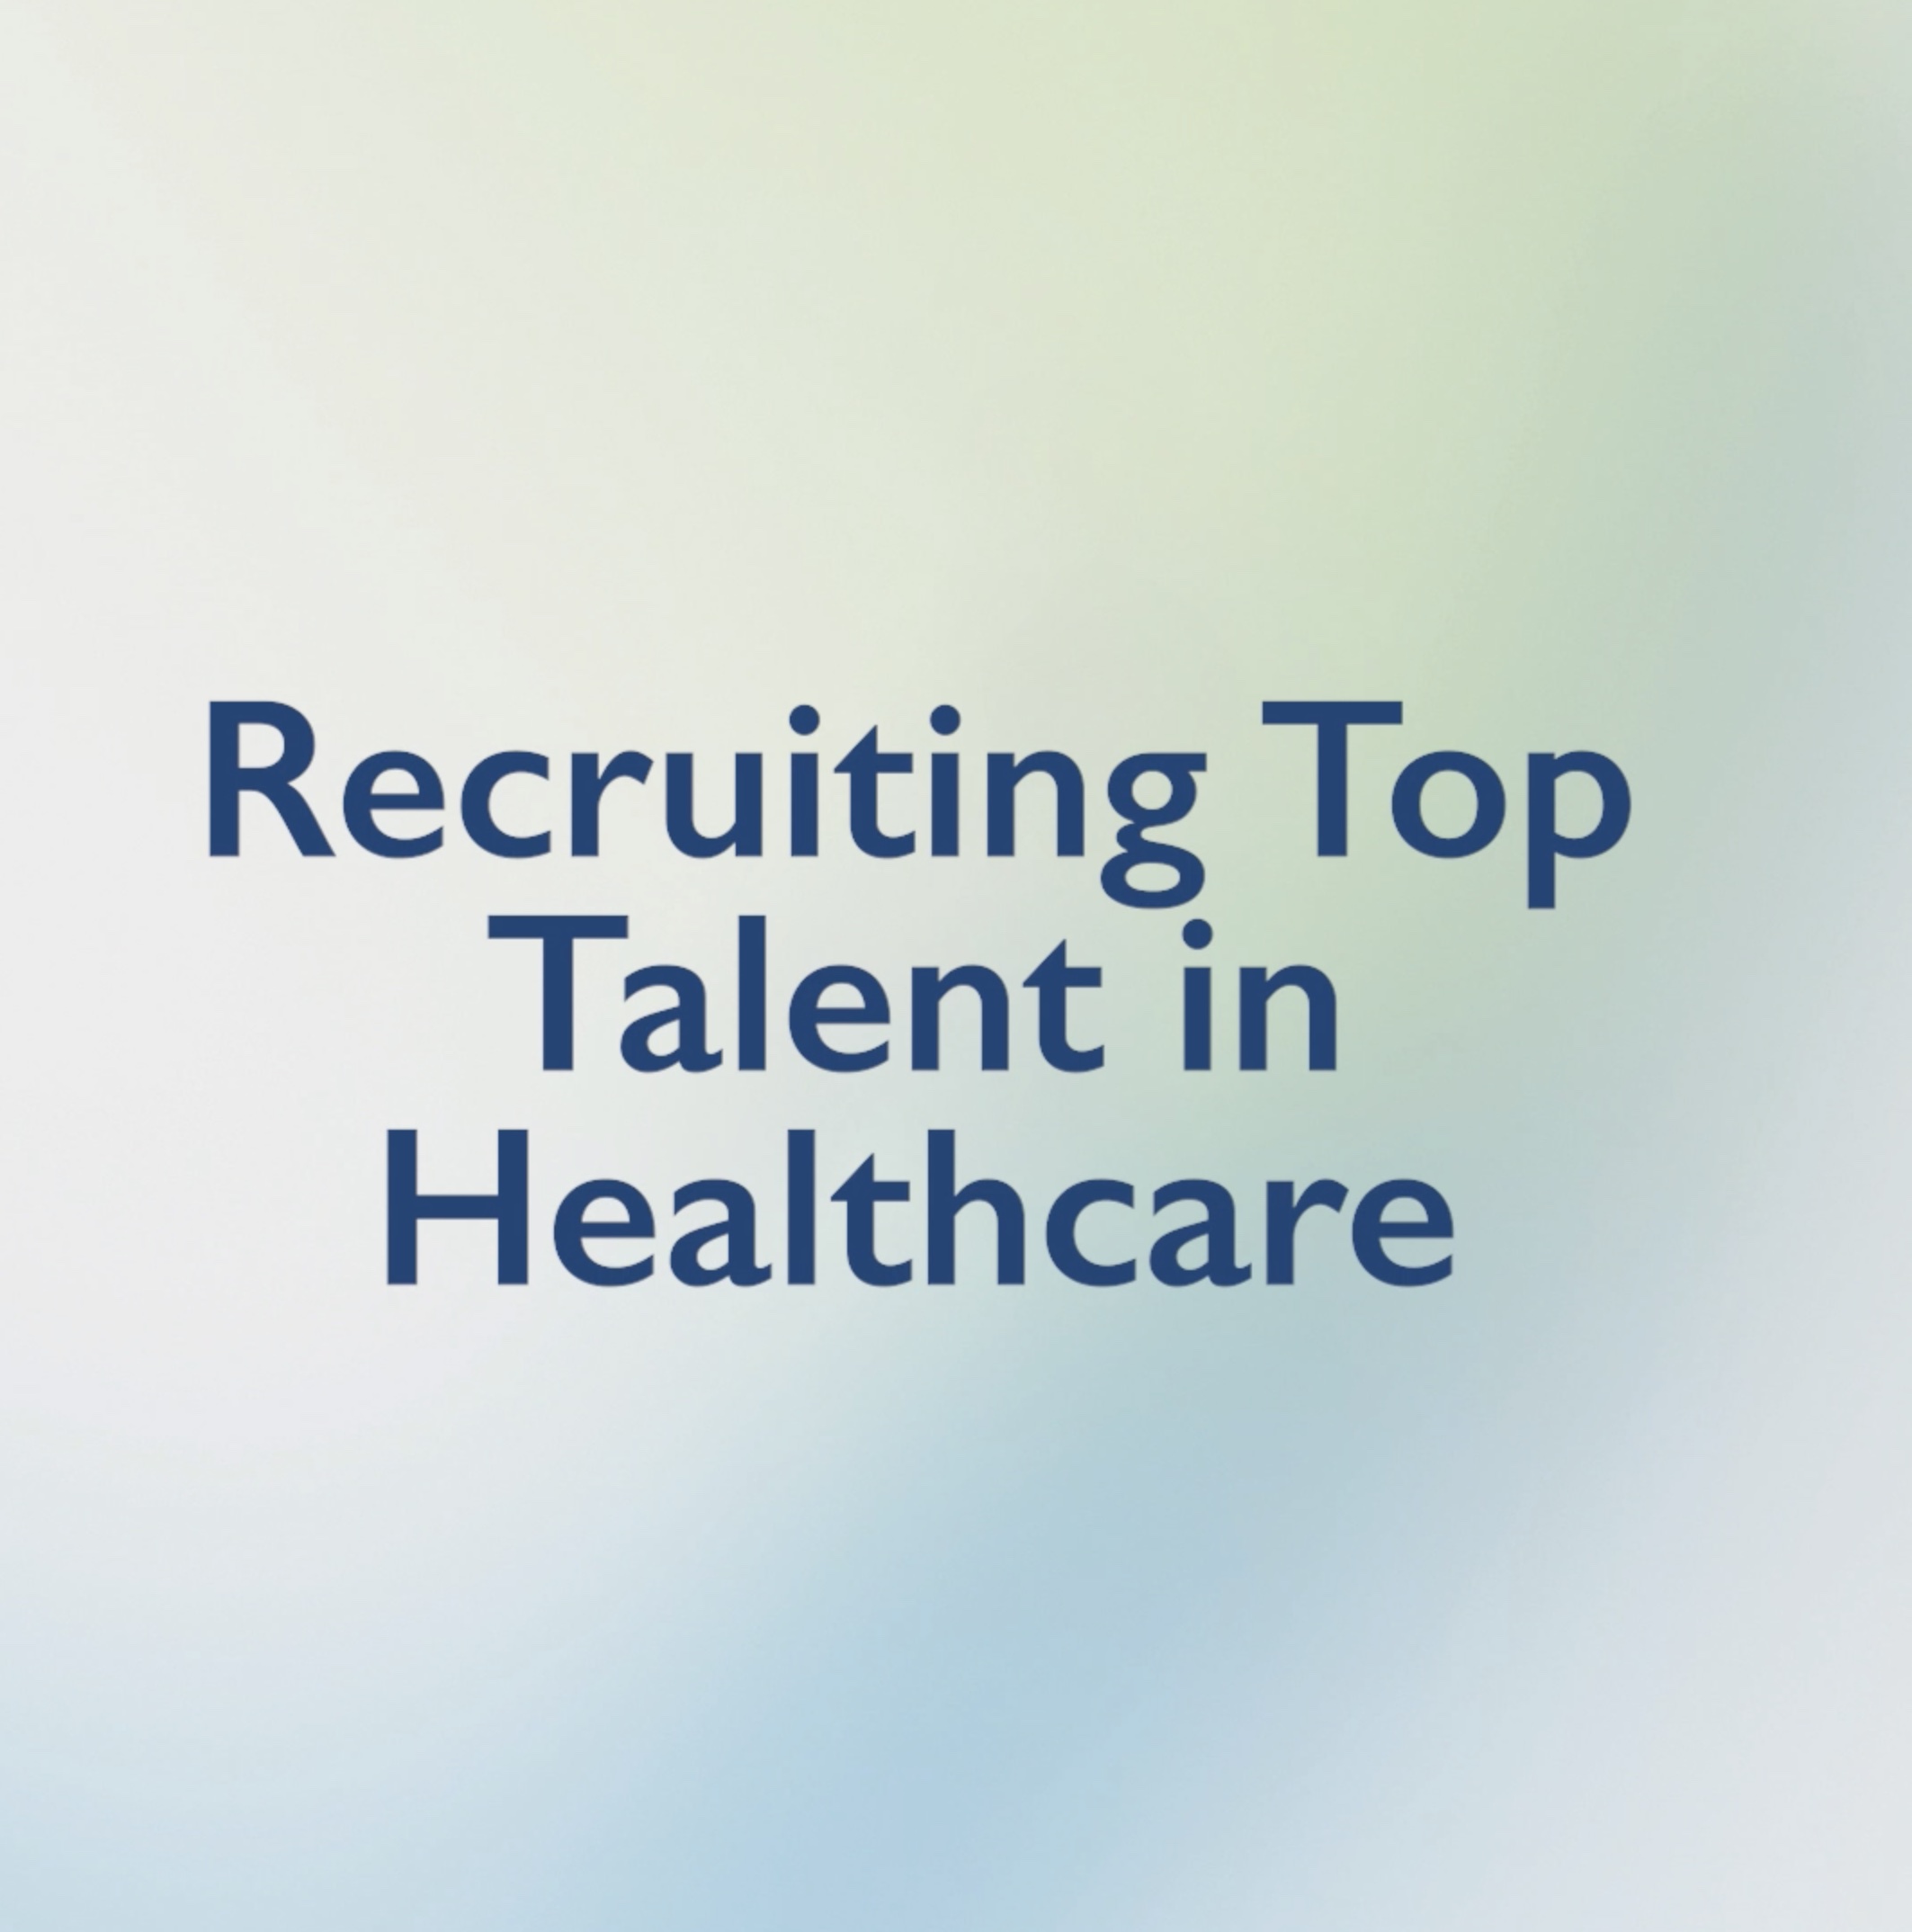 Recruiting Top Talent in Healthcare